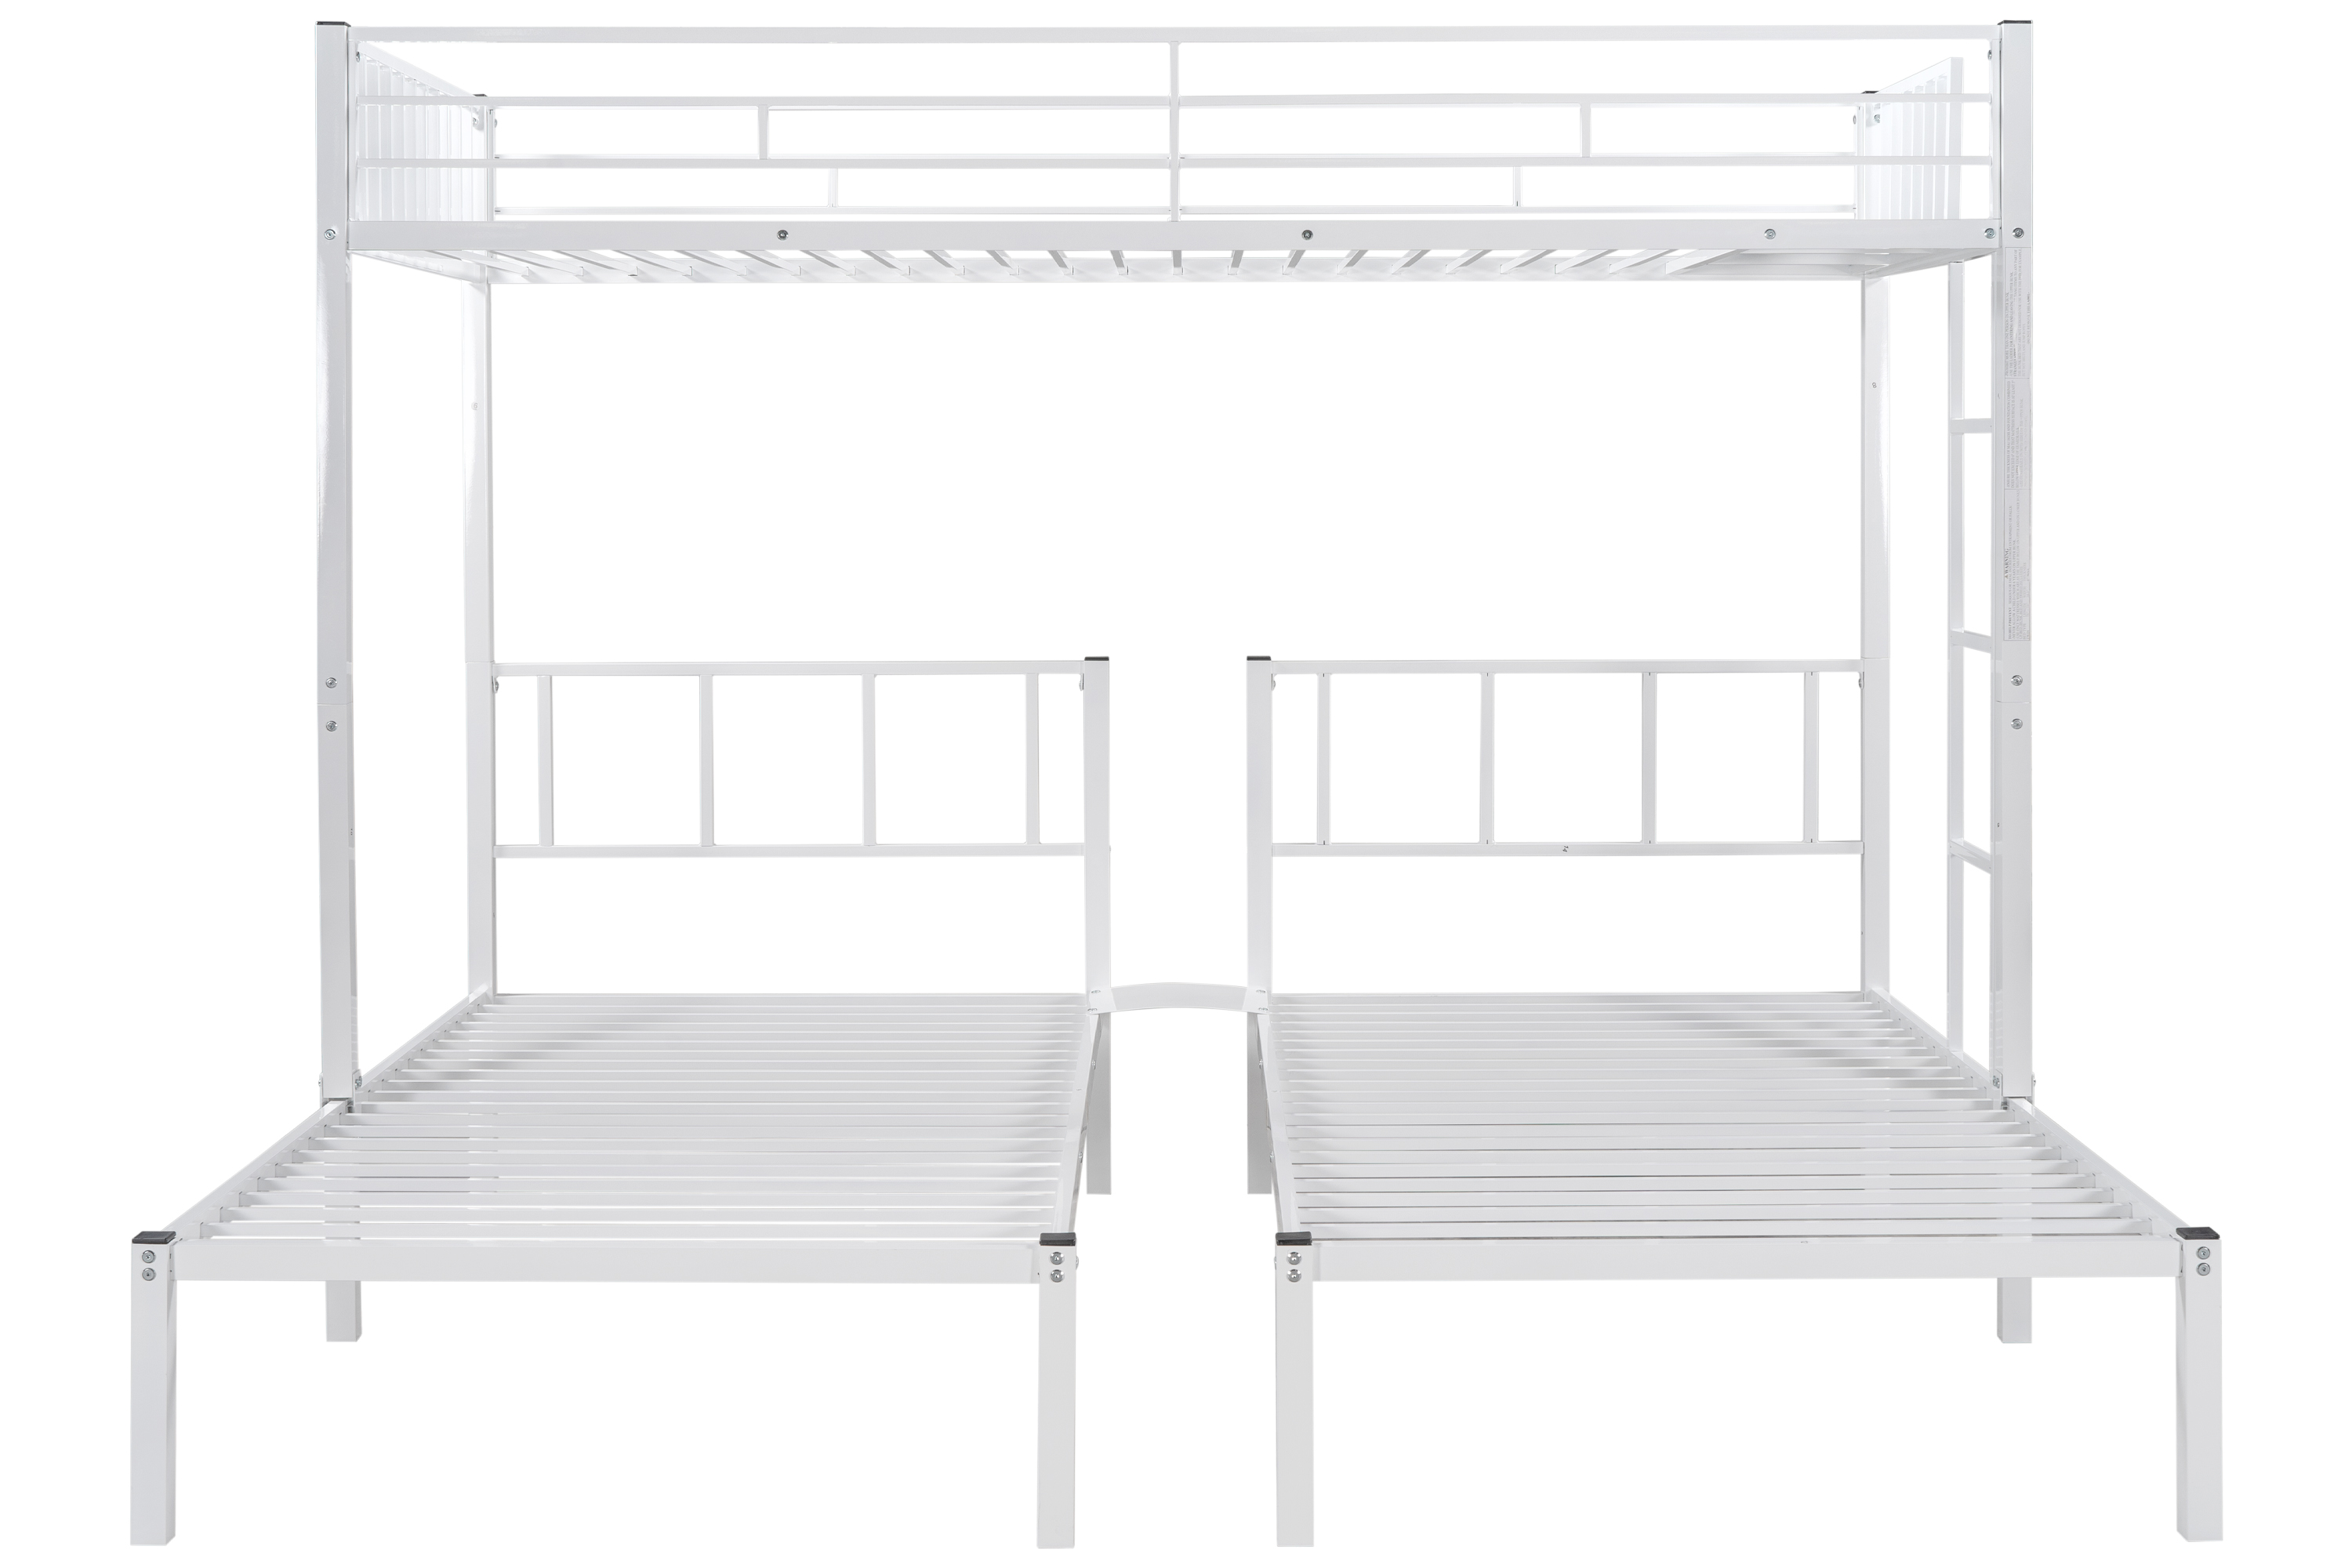 White Triple Twin Bunk Bed, Can Be Separated Into 3 Twin Beds, Suitable for Bedroom Living Room Dorm, 91.73"L x 77.95"W x 72.05"H, for Kids Adults Teens【2022 New】 - image 2 of 9